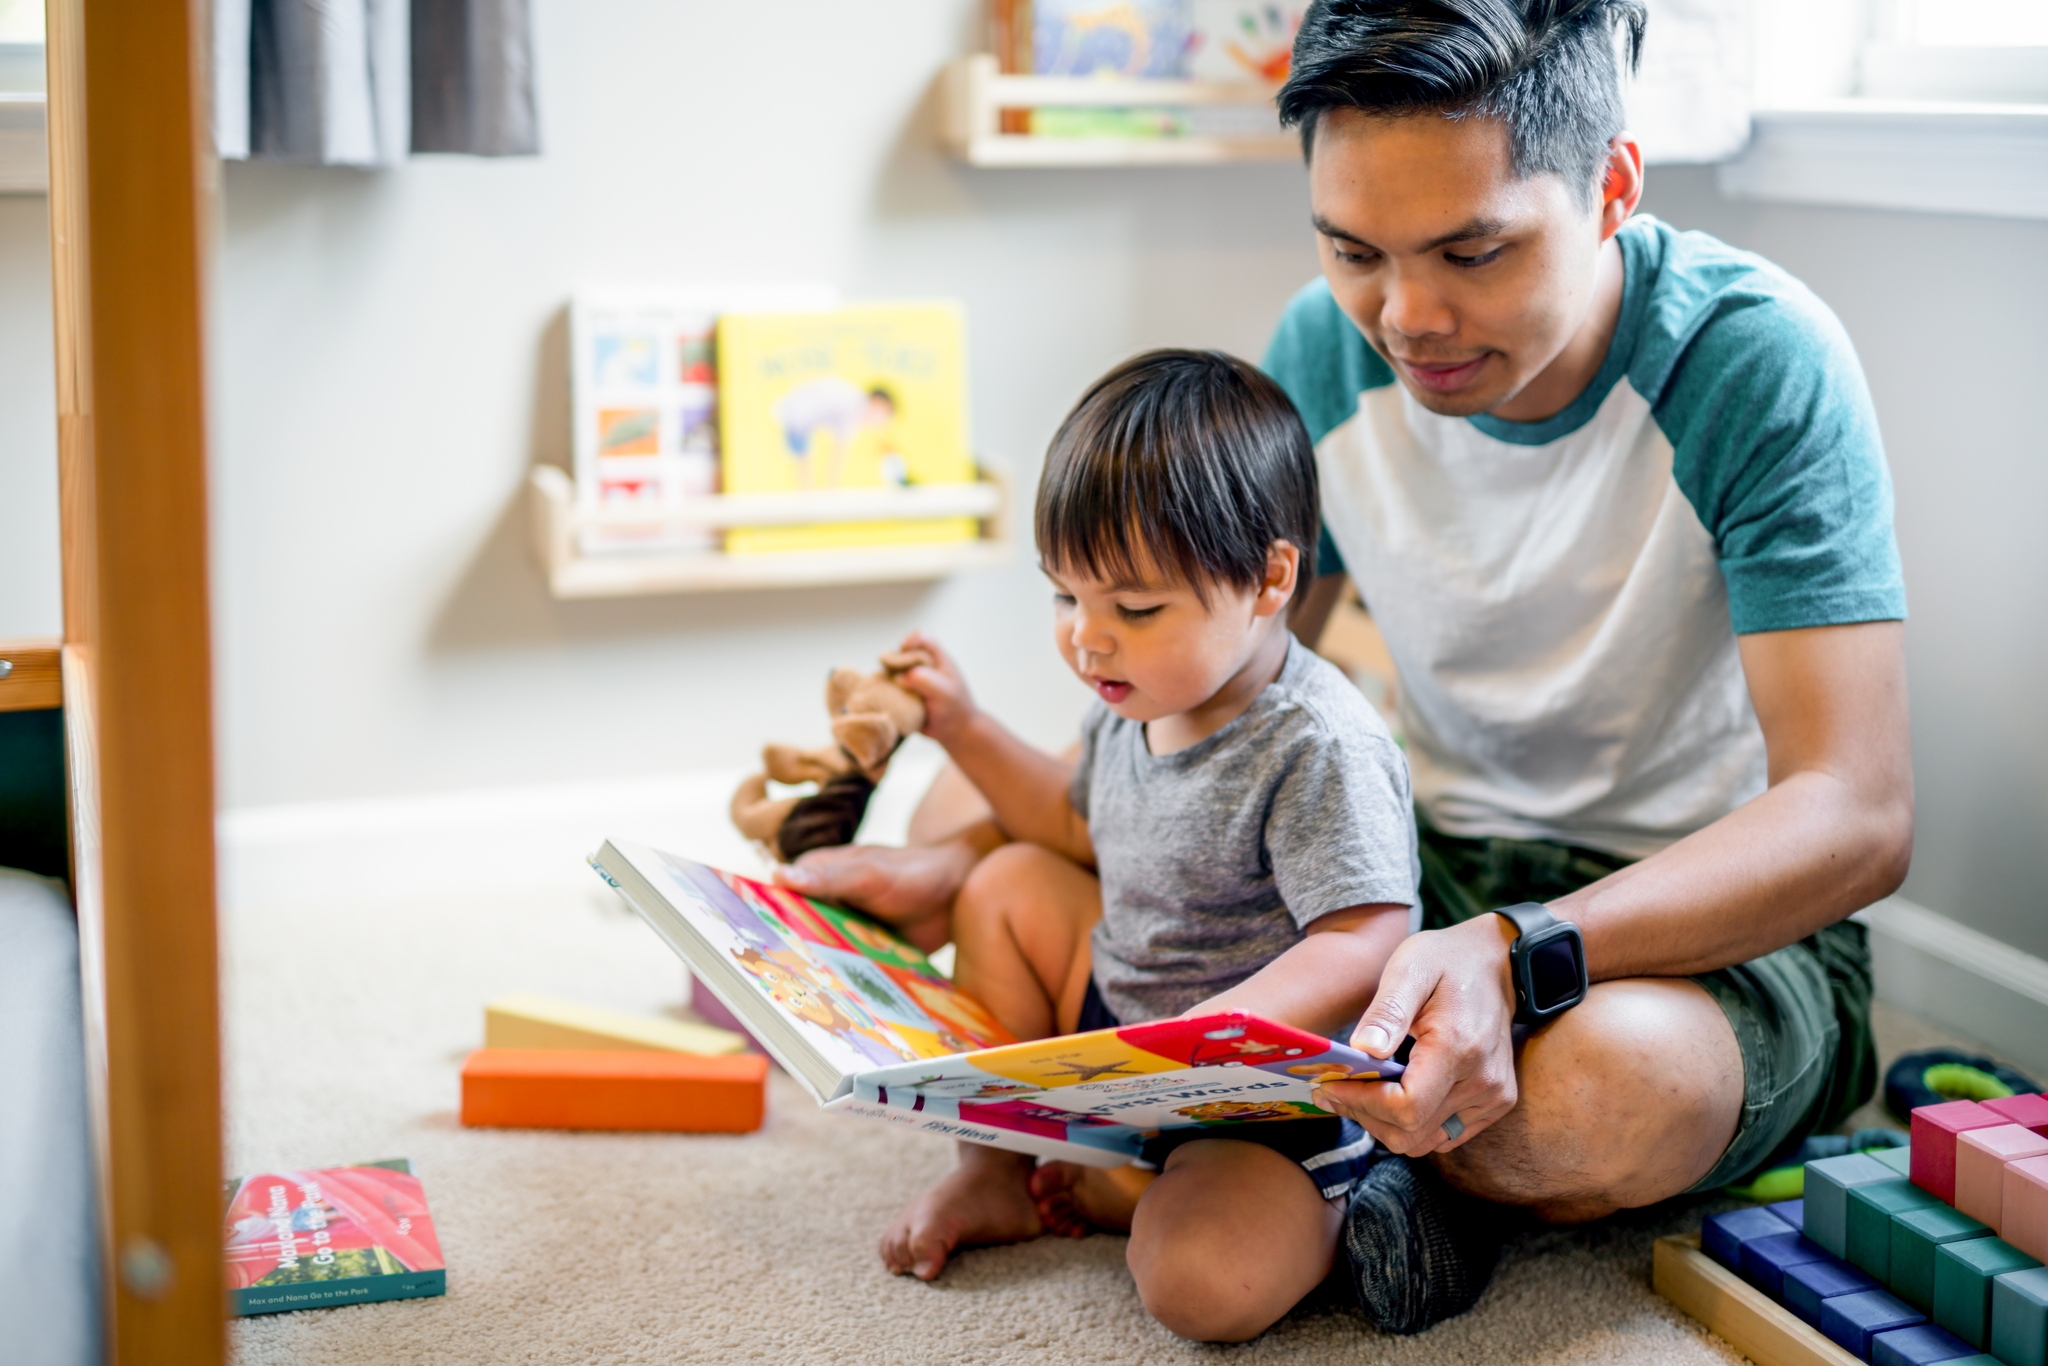 toddler daycare adjustment: Dad with toddler read books in daycare